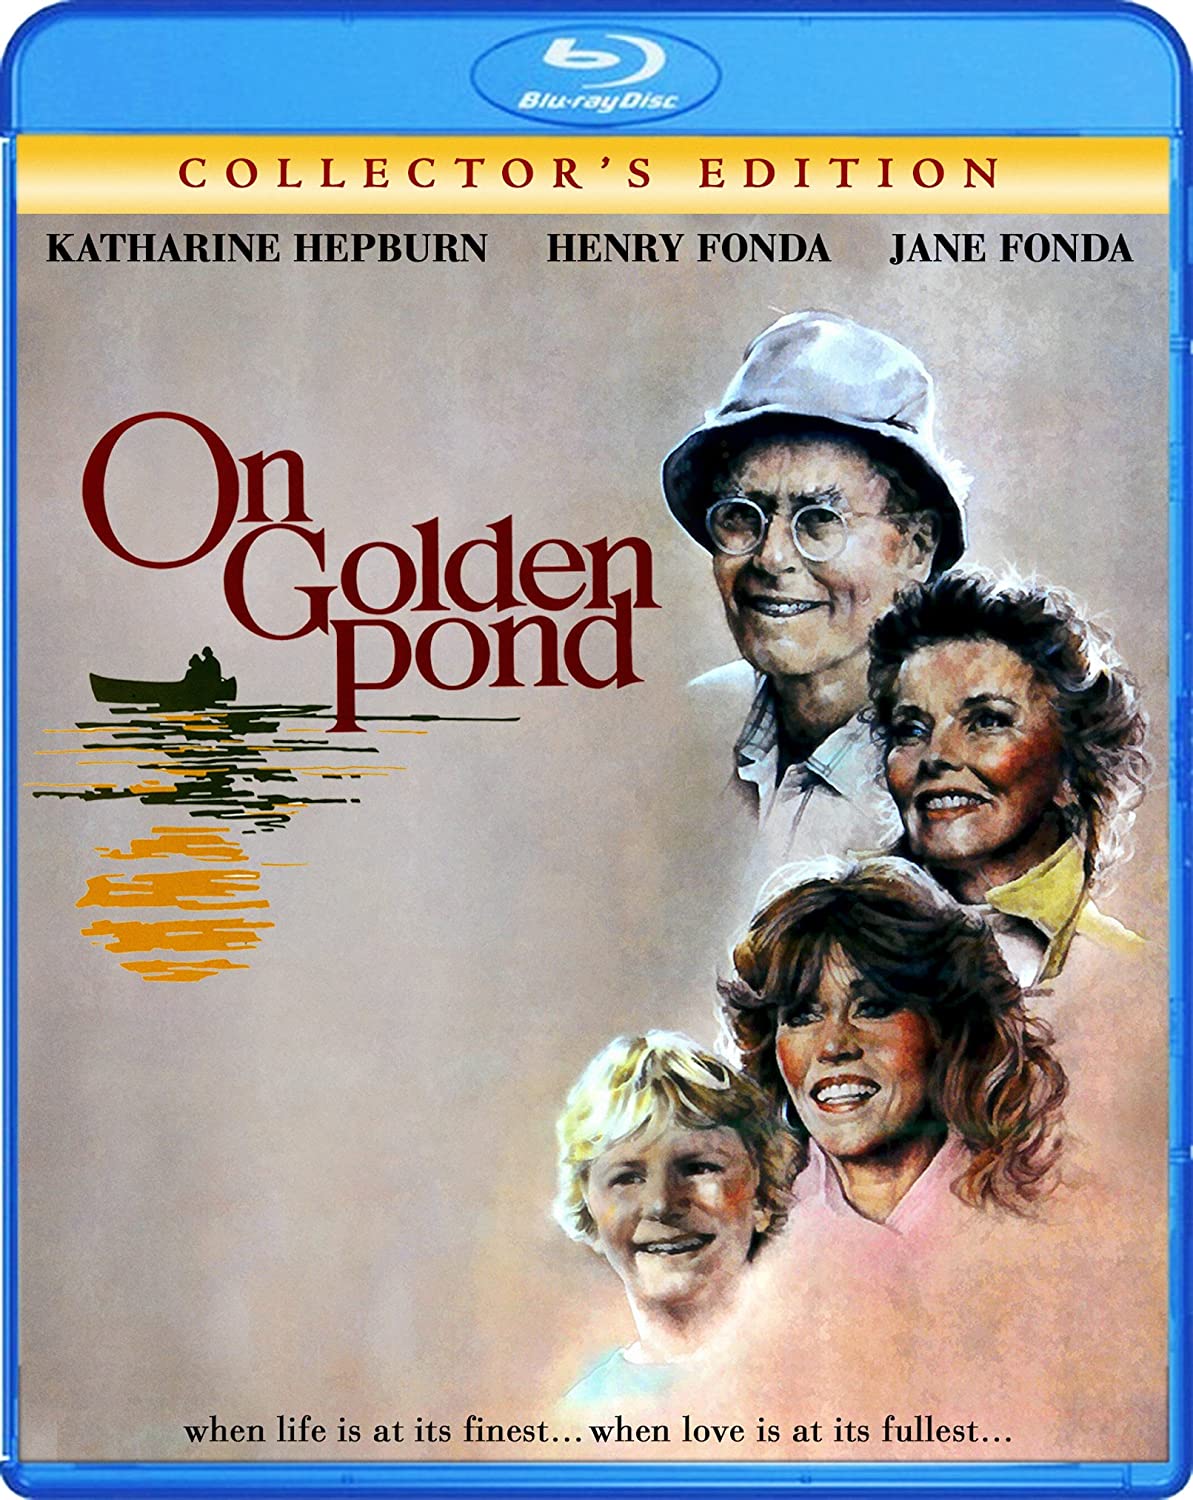 On Golden Pond (Collector's Edition) [Blu-ray]